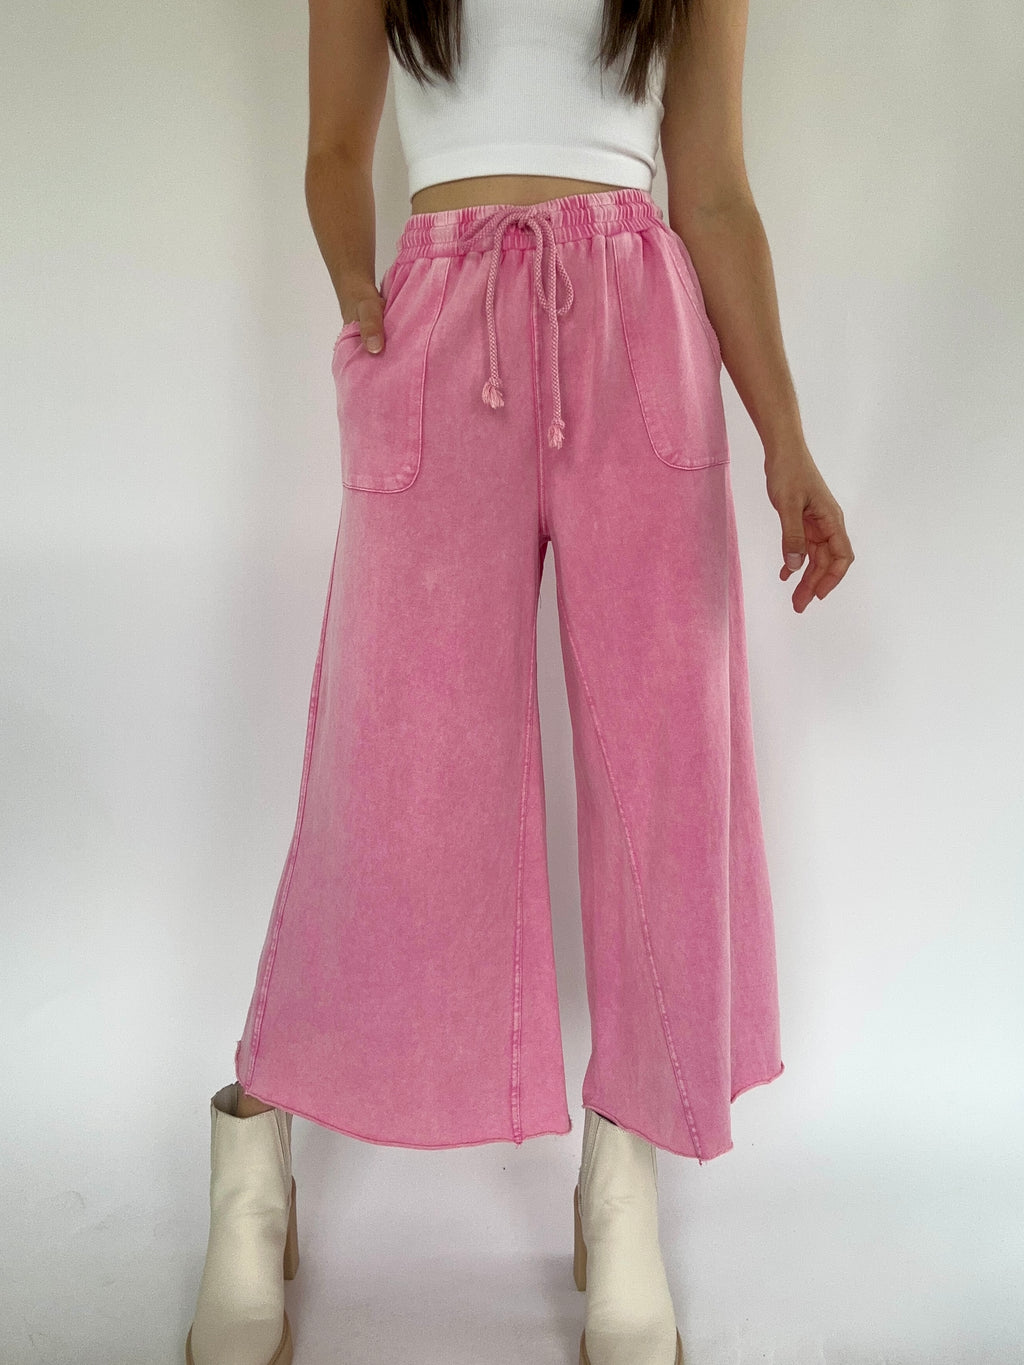 On The Road Again Pants - Barbie Pink